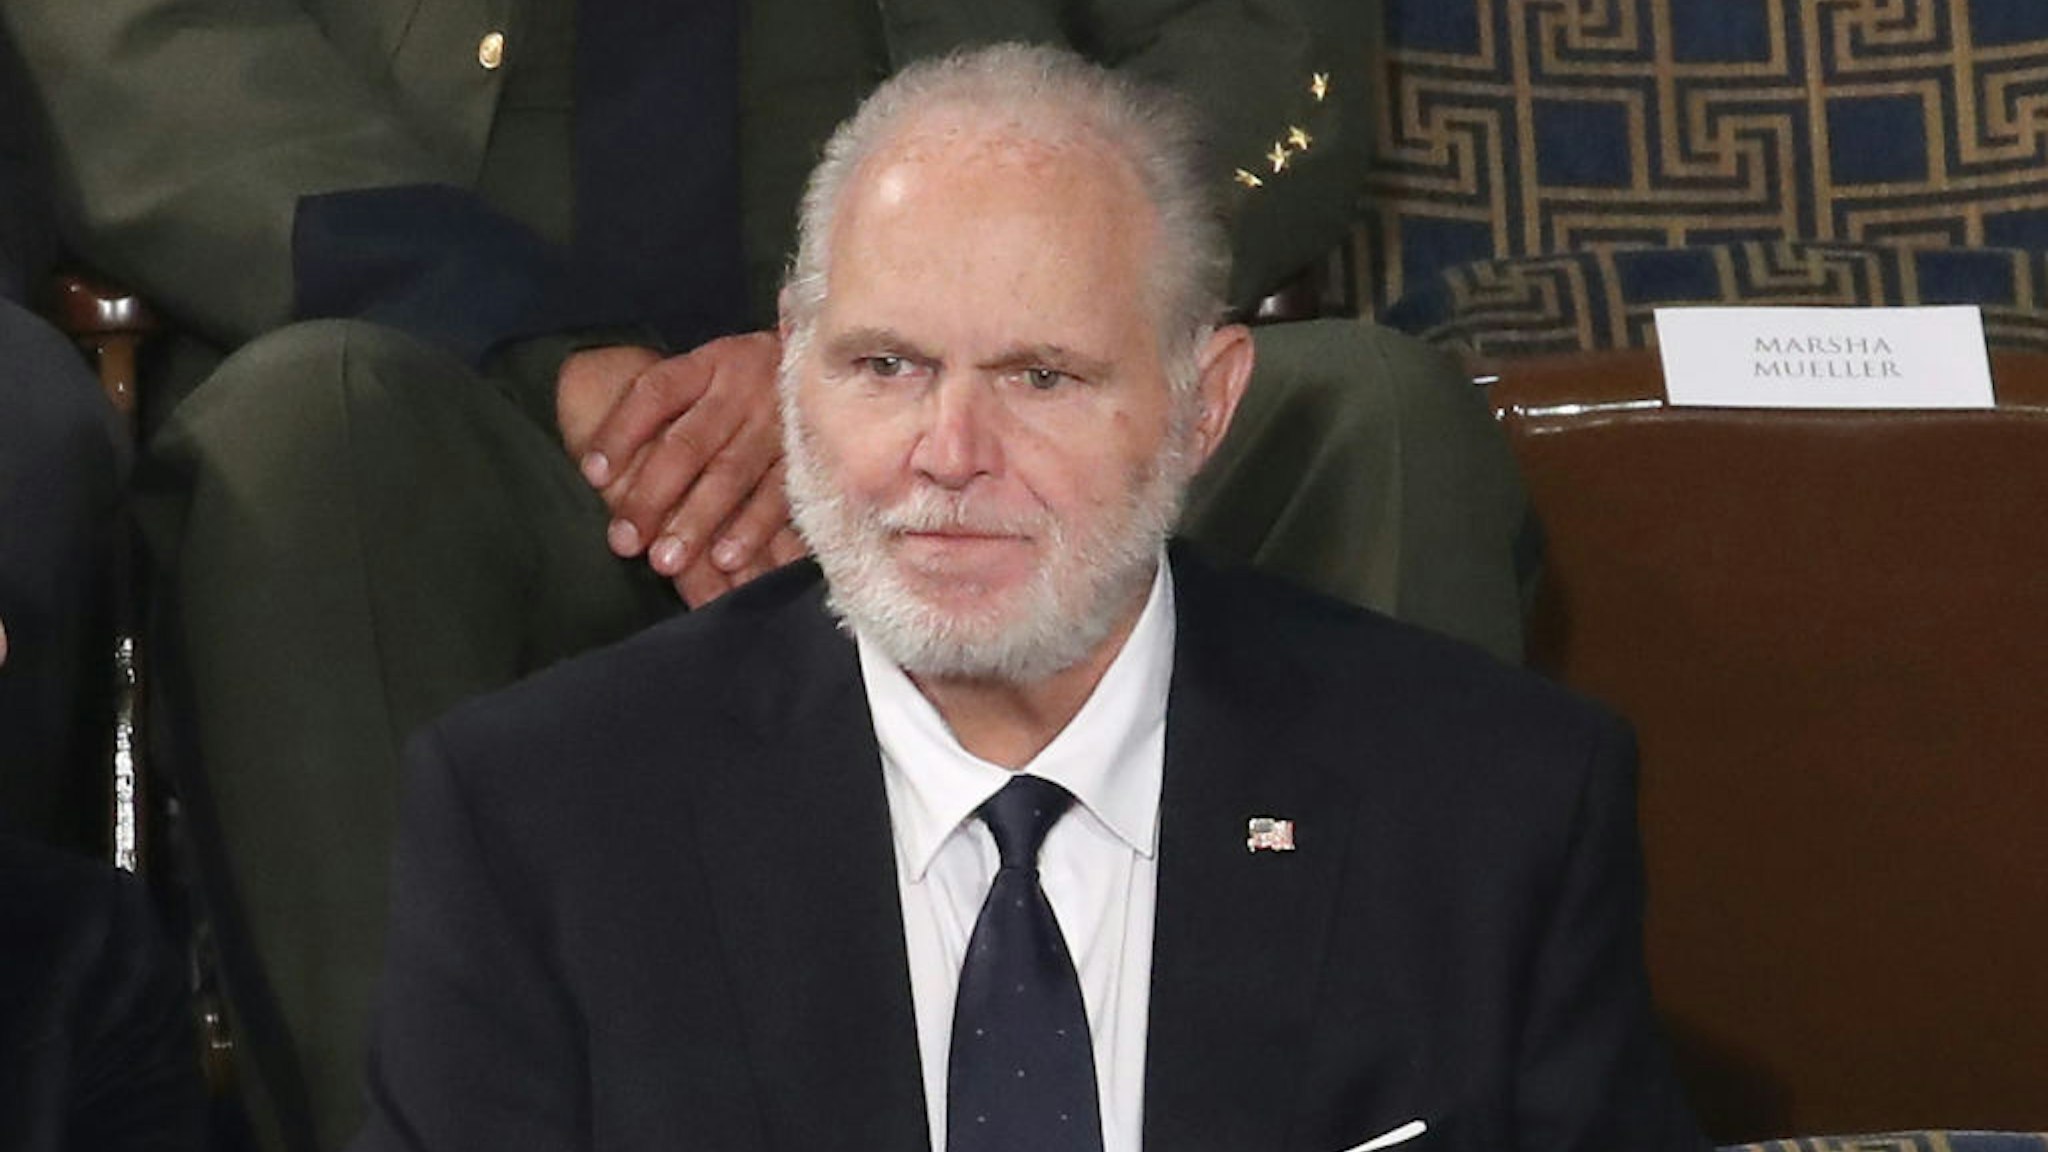 Radio personality Rush Limbaugh sits in the First Lady's box ahead of the State of the Union address in the chamber of the U.S. House of Representatives on February 04, 2020 in Washington, DC.